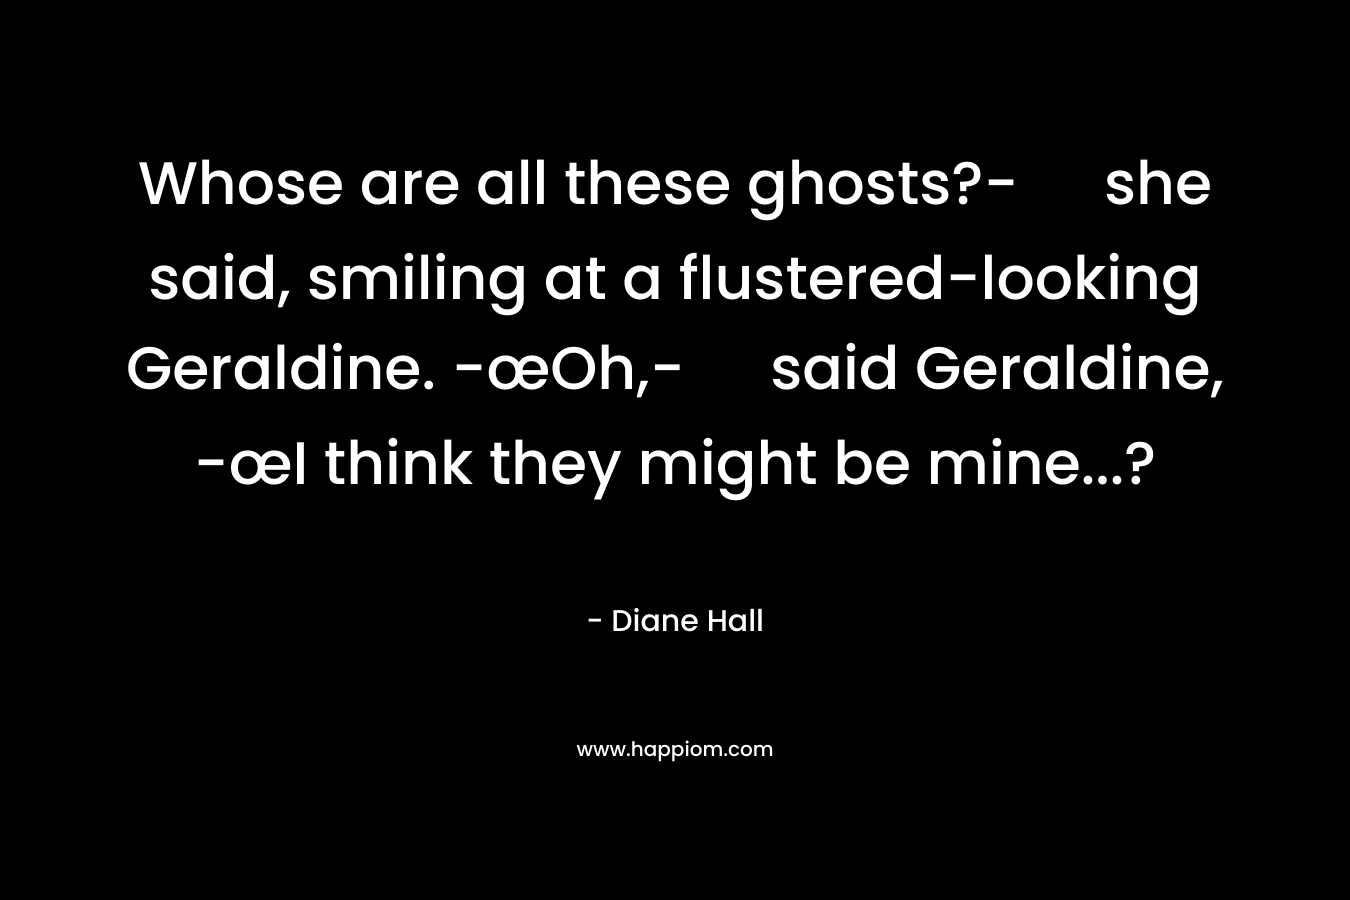 Whose are all these ghosts?- she said, smiling at a flustered-looking Geraldine. -œOh,- said Geraldine, -œI think they might be mine...?